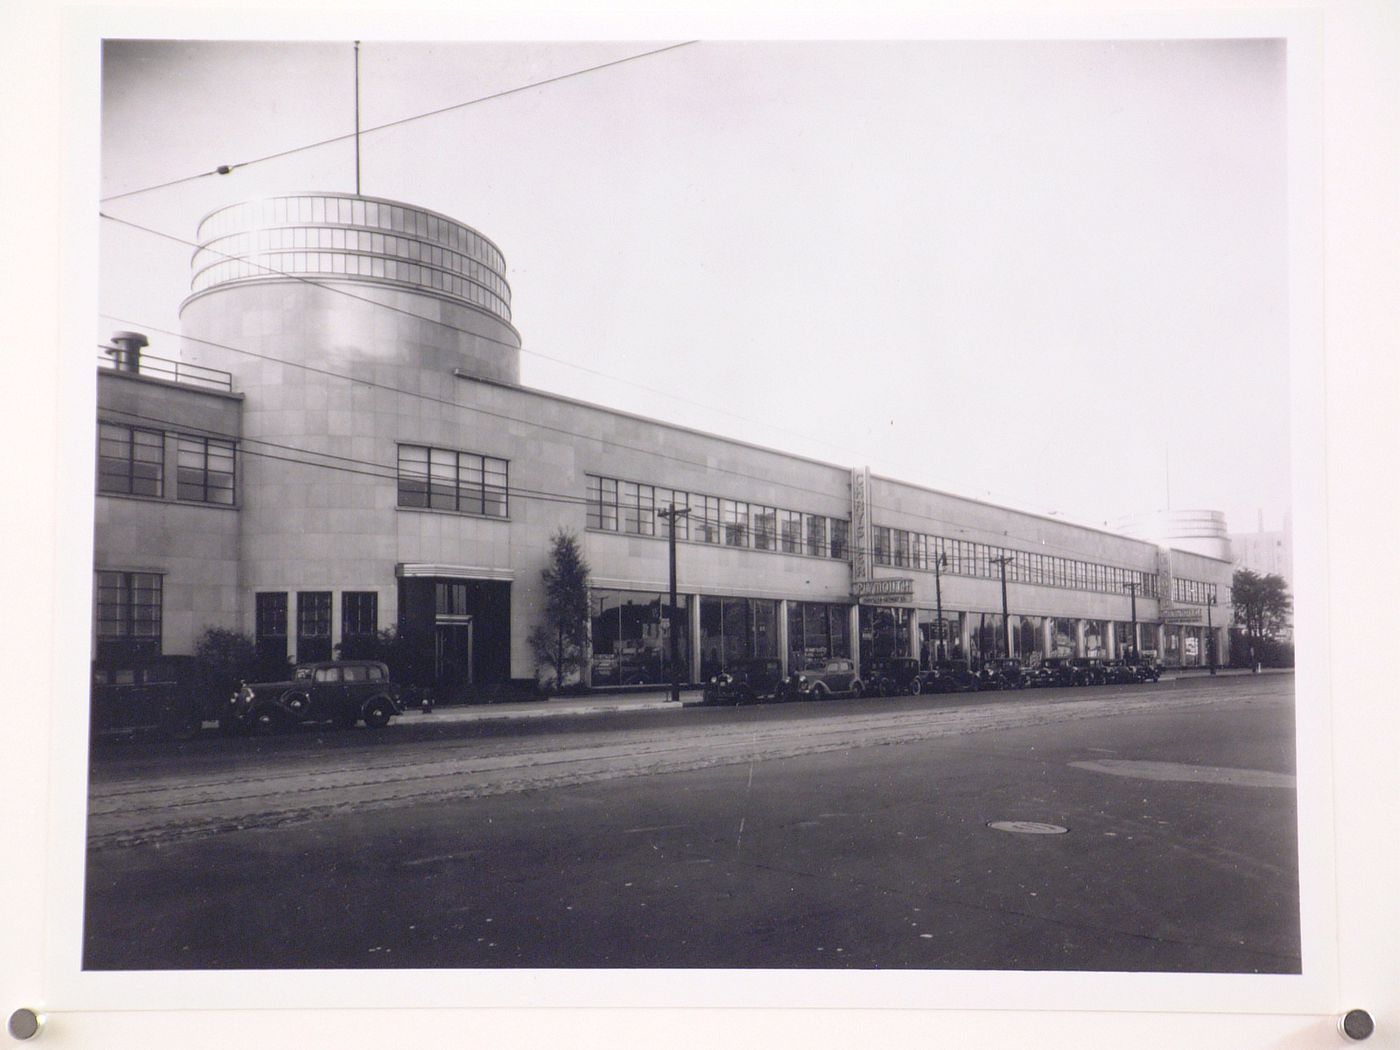 View of the principal façade of the Sales and Service Building, Chrysler Corporation Plymouth and DeSoto divisions, East Jefferson Avenue, Detroit, Michigan